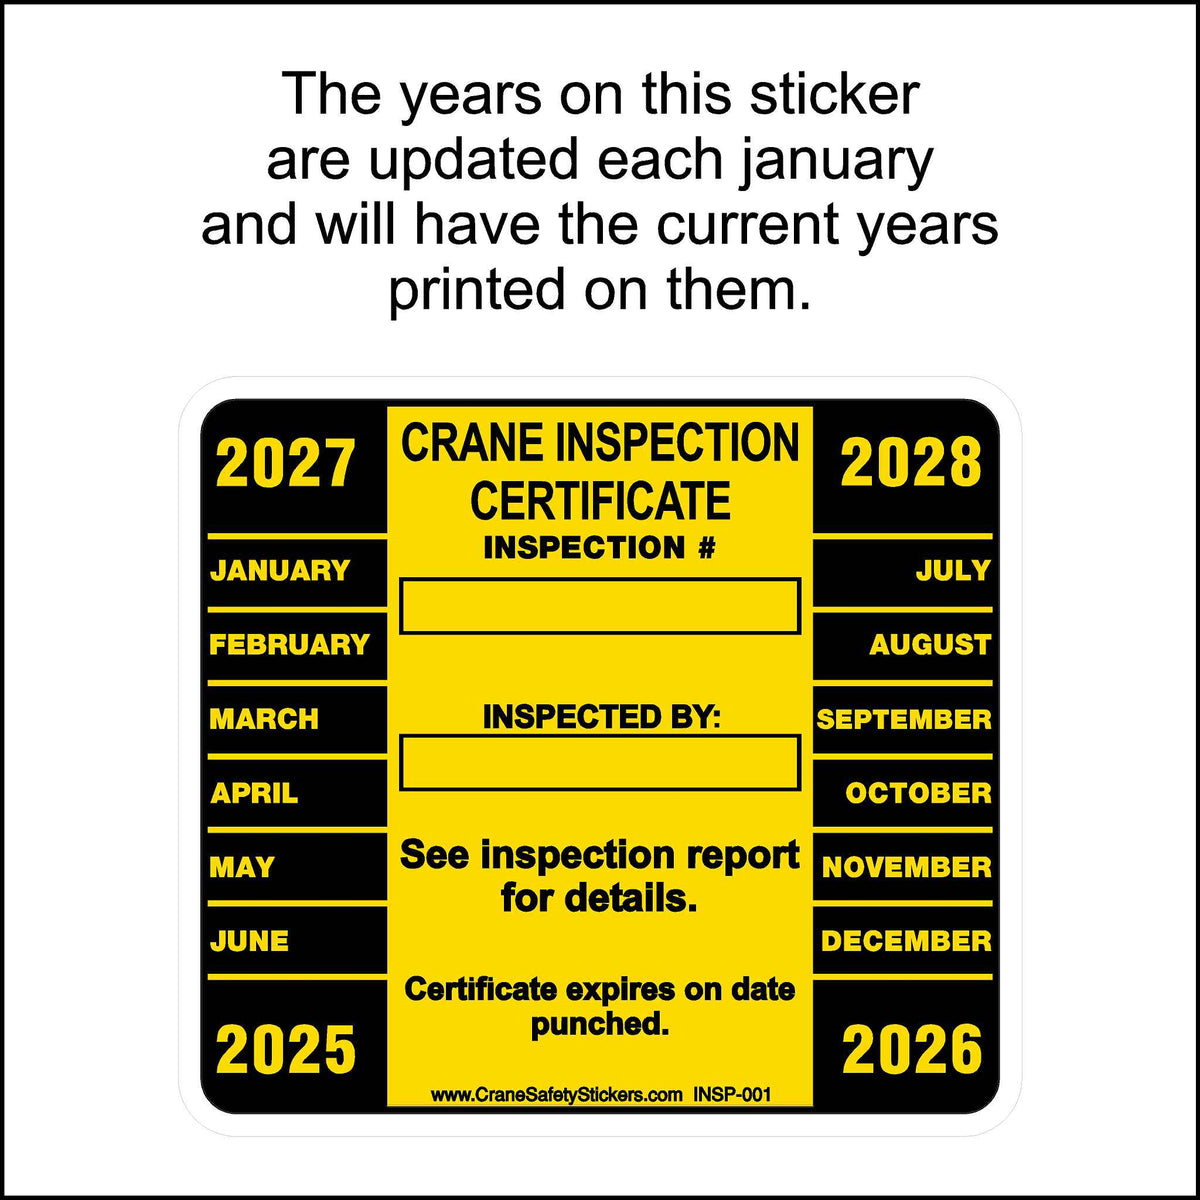 Annual Crane Inspection Sticker with the current years printed on it.